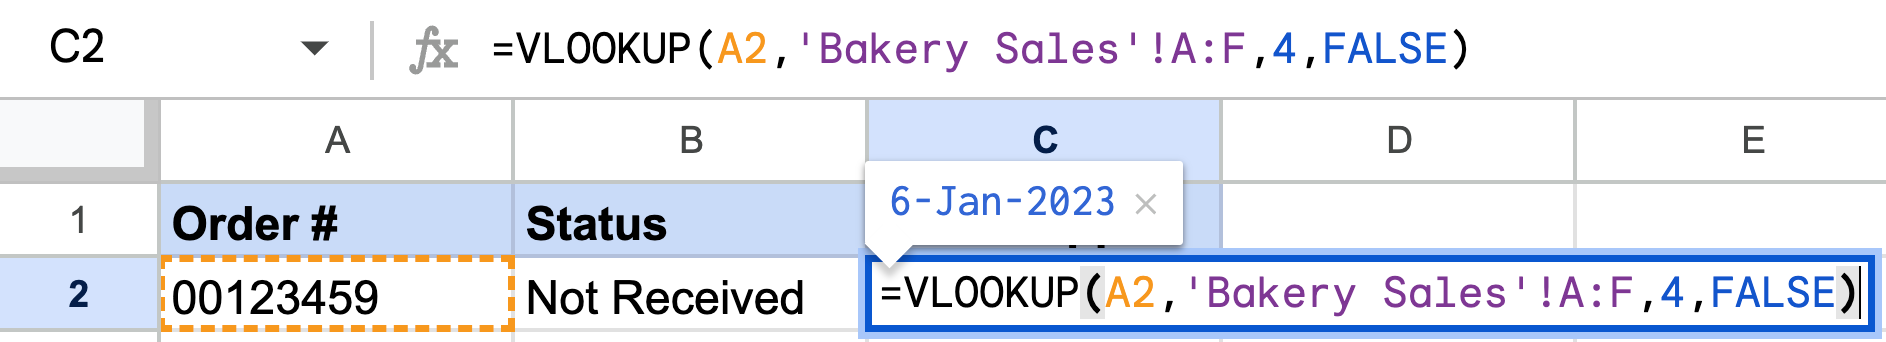 VLOOKUP example